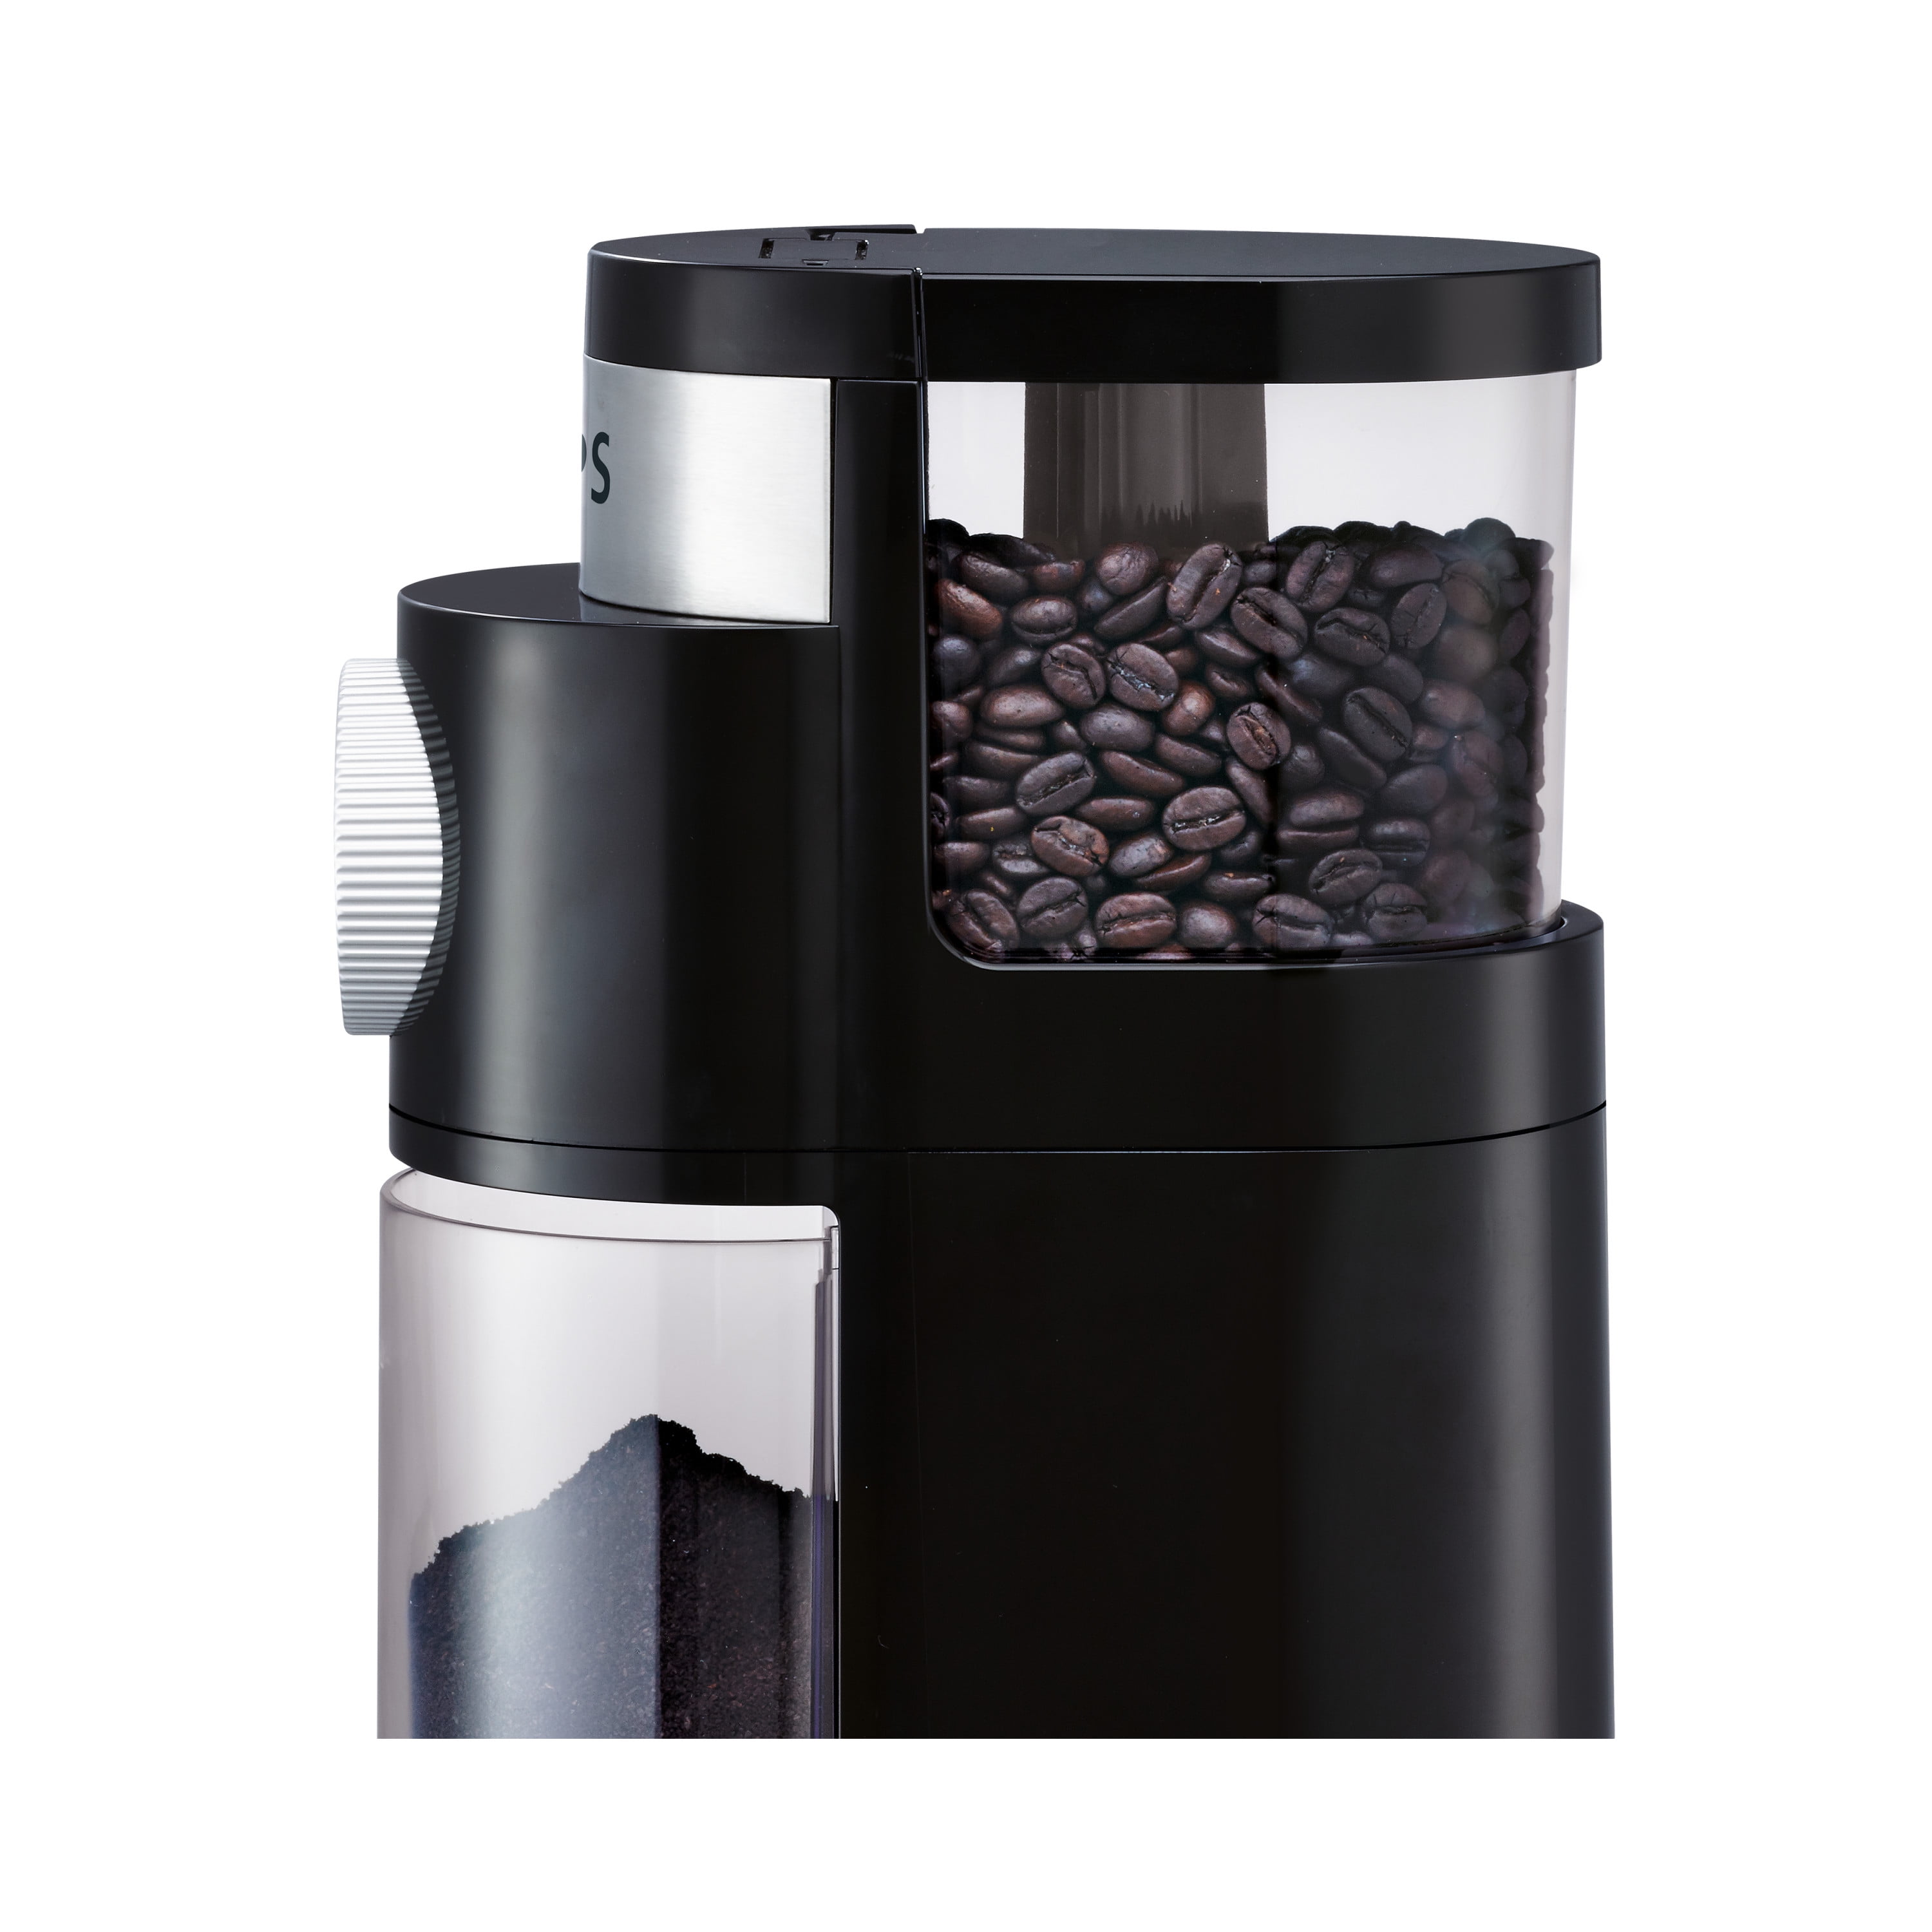 Krups Die Cast Conical Burr Grinder: ifyoulovecoffee